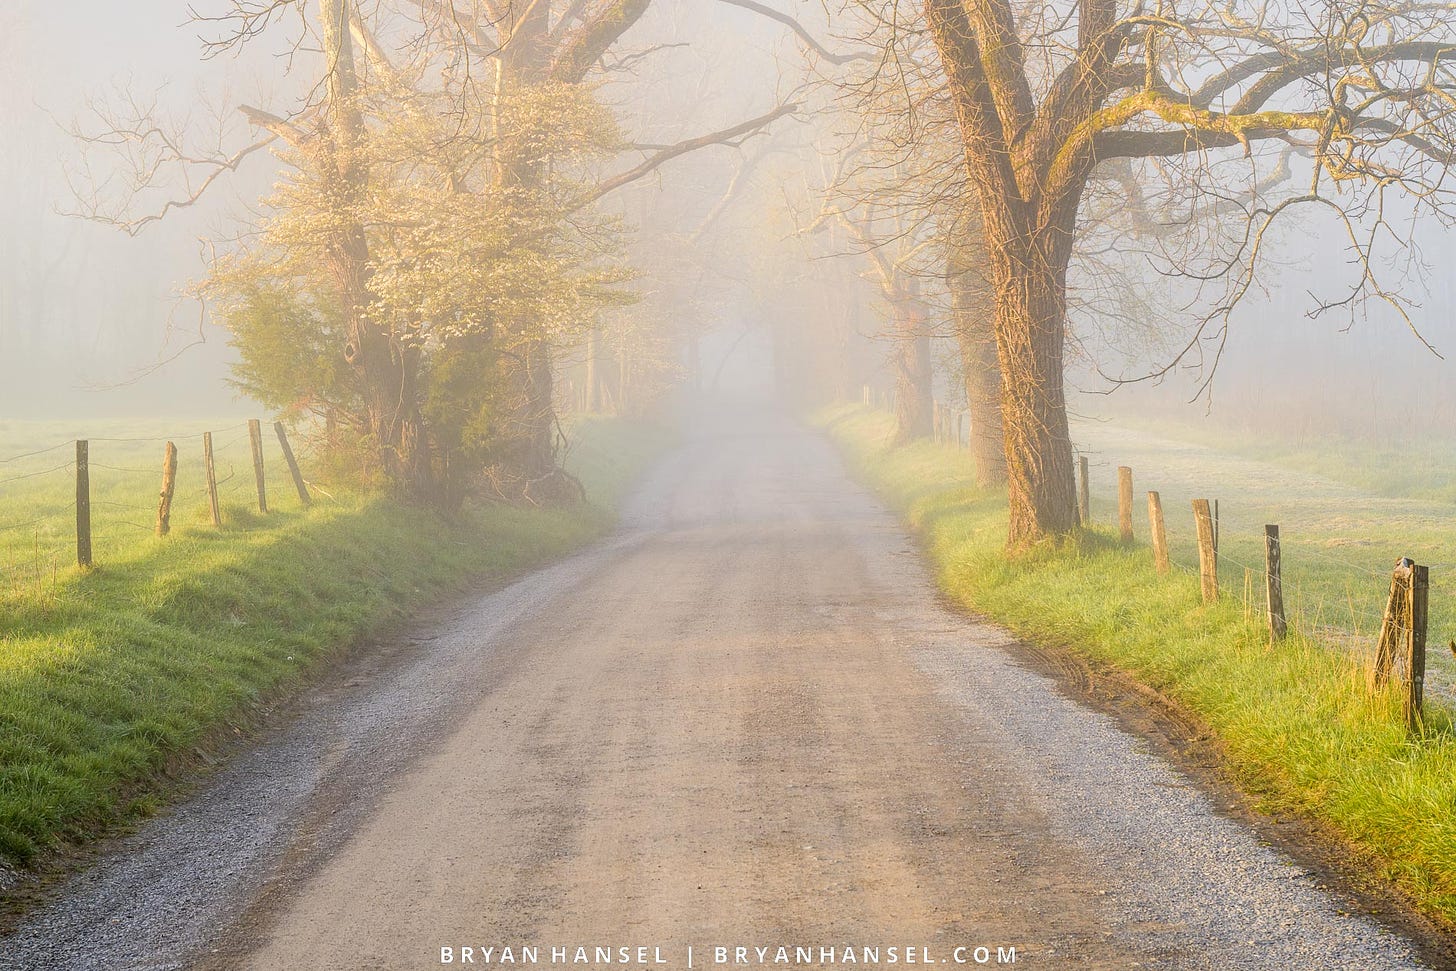 A photo of a gravel road leading off into warm colored fog.